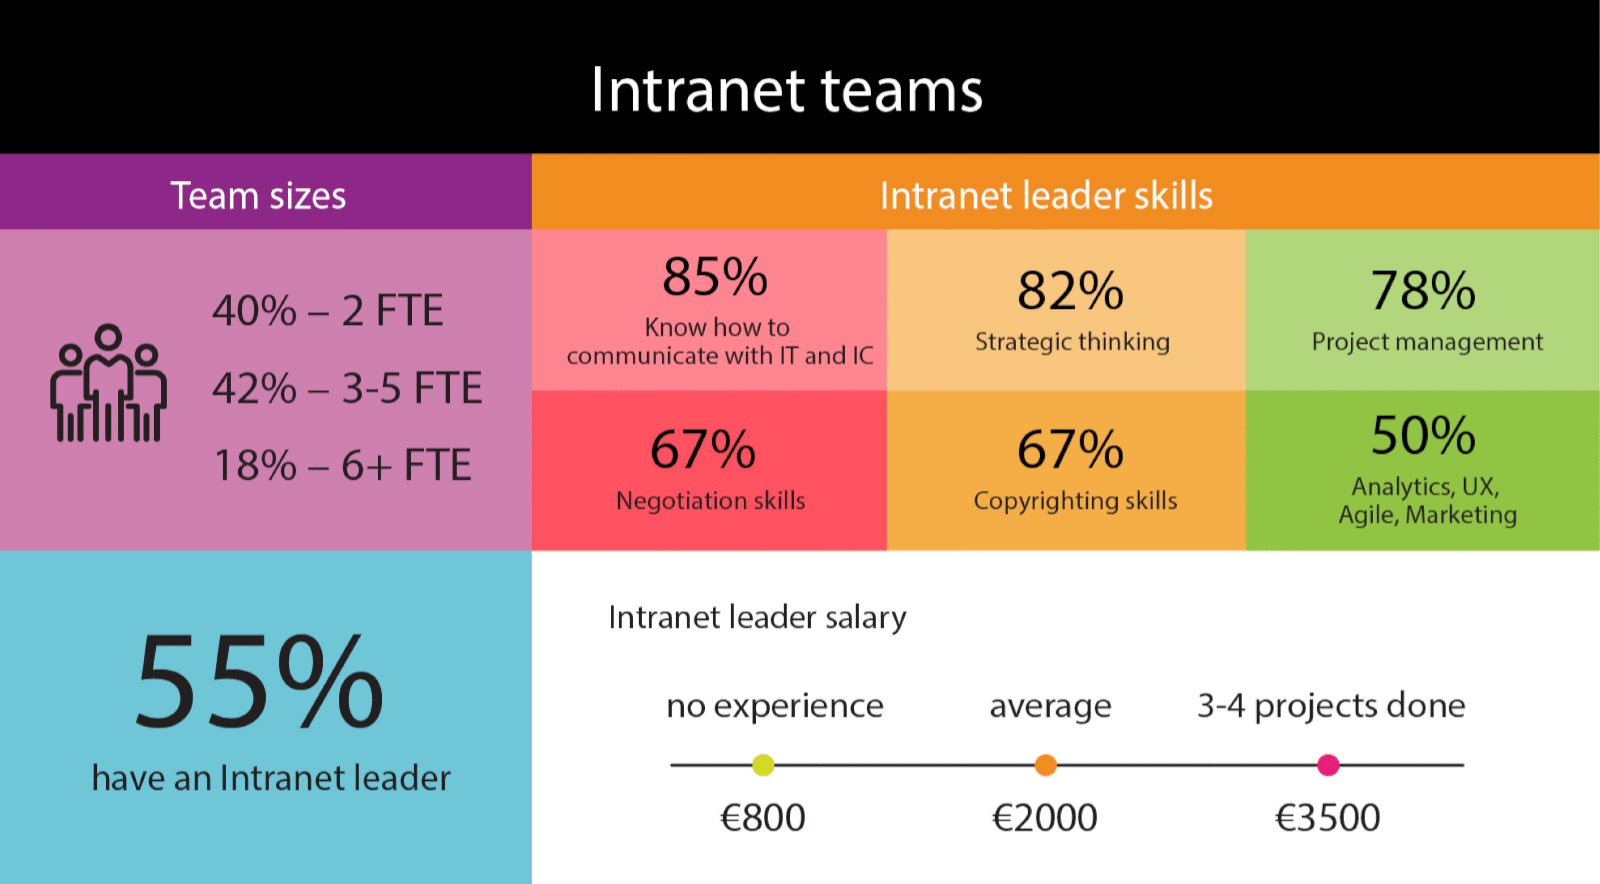 Intranet teams: 42% have 3 to 5 people.